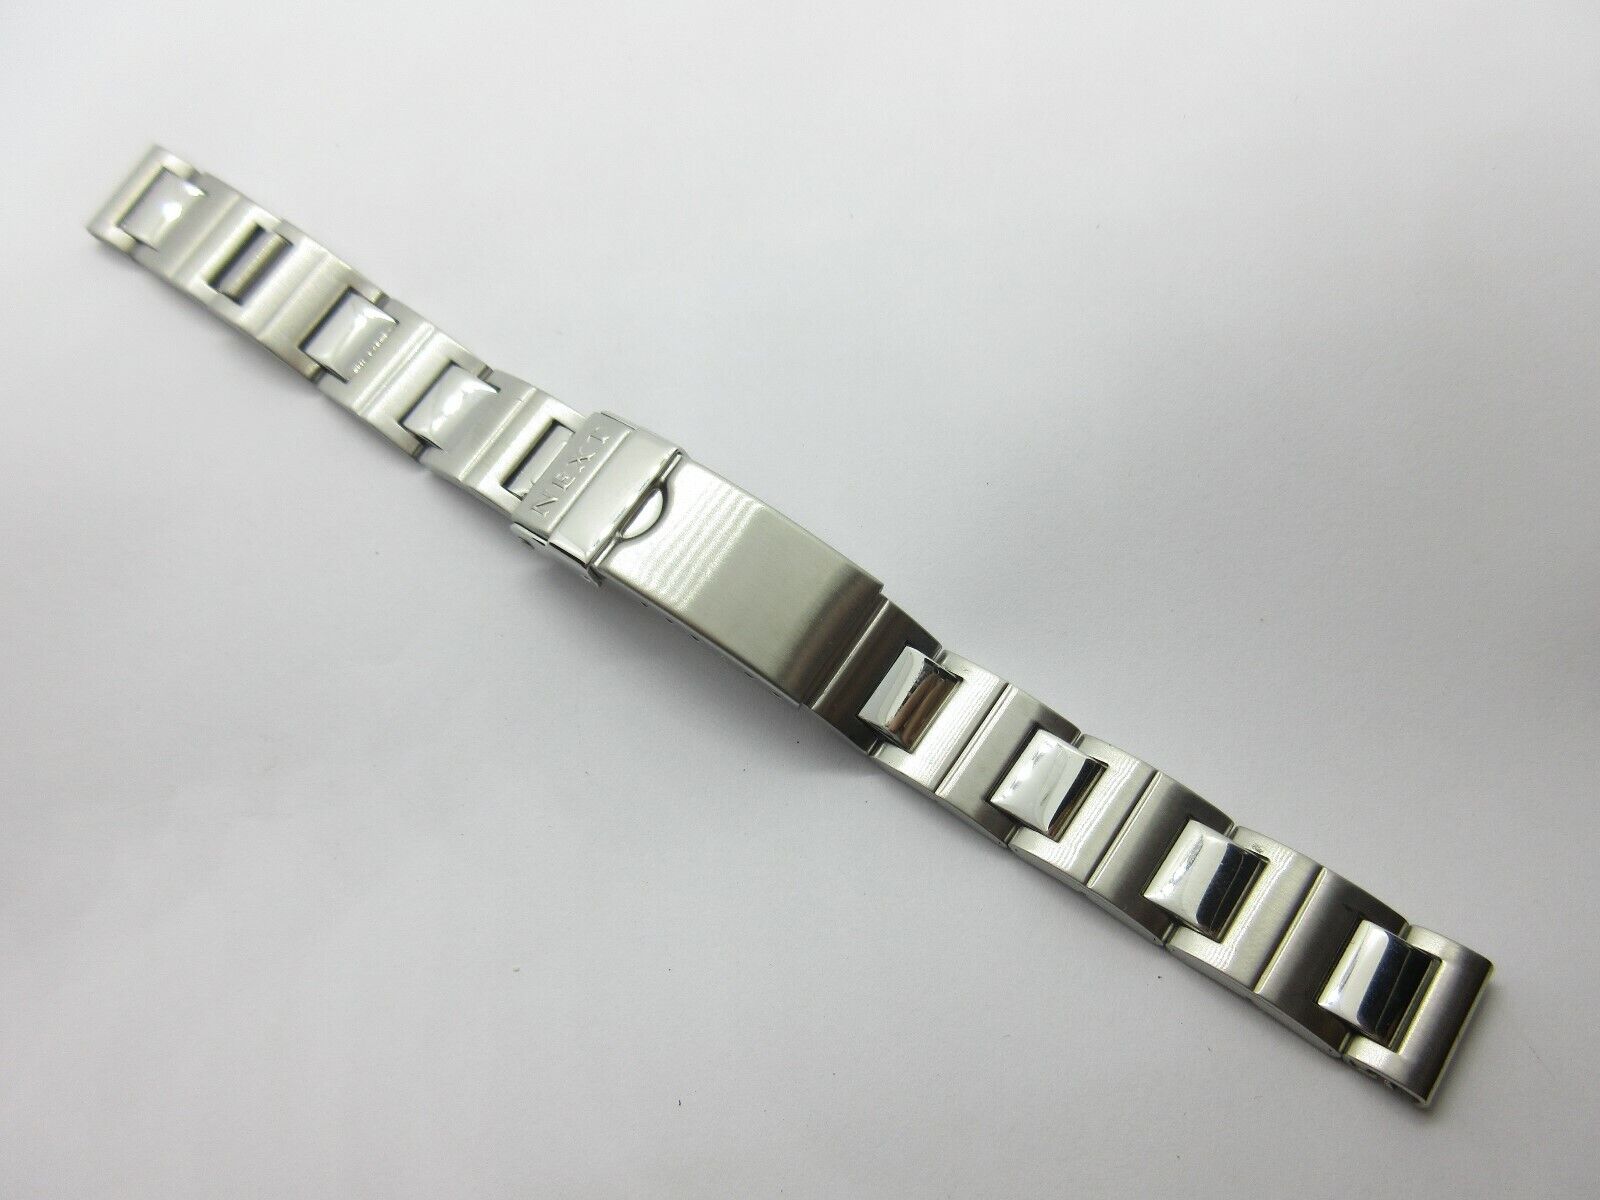 Next Brushed/Polished Stainless Steel 12mm Watch Strap Band Deployment Clasp